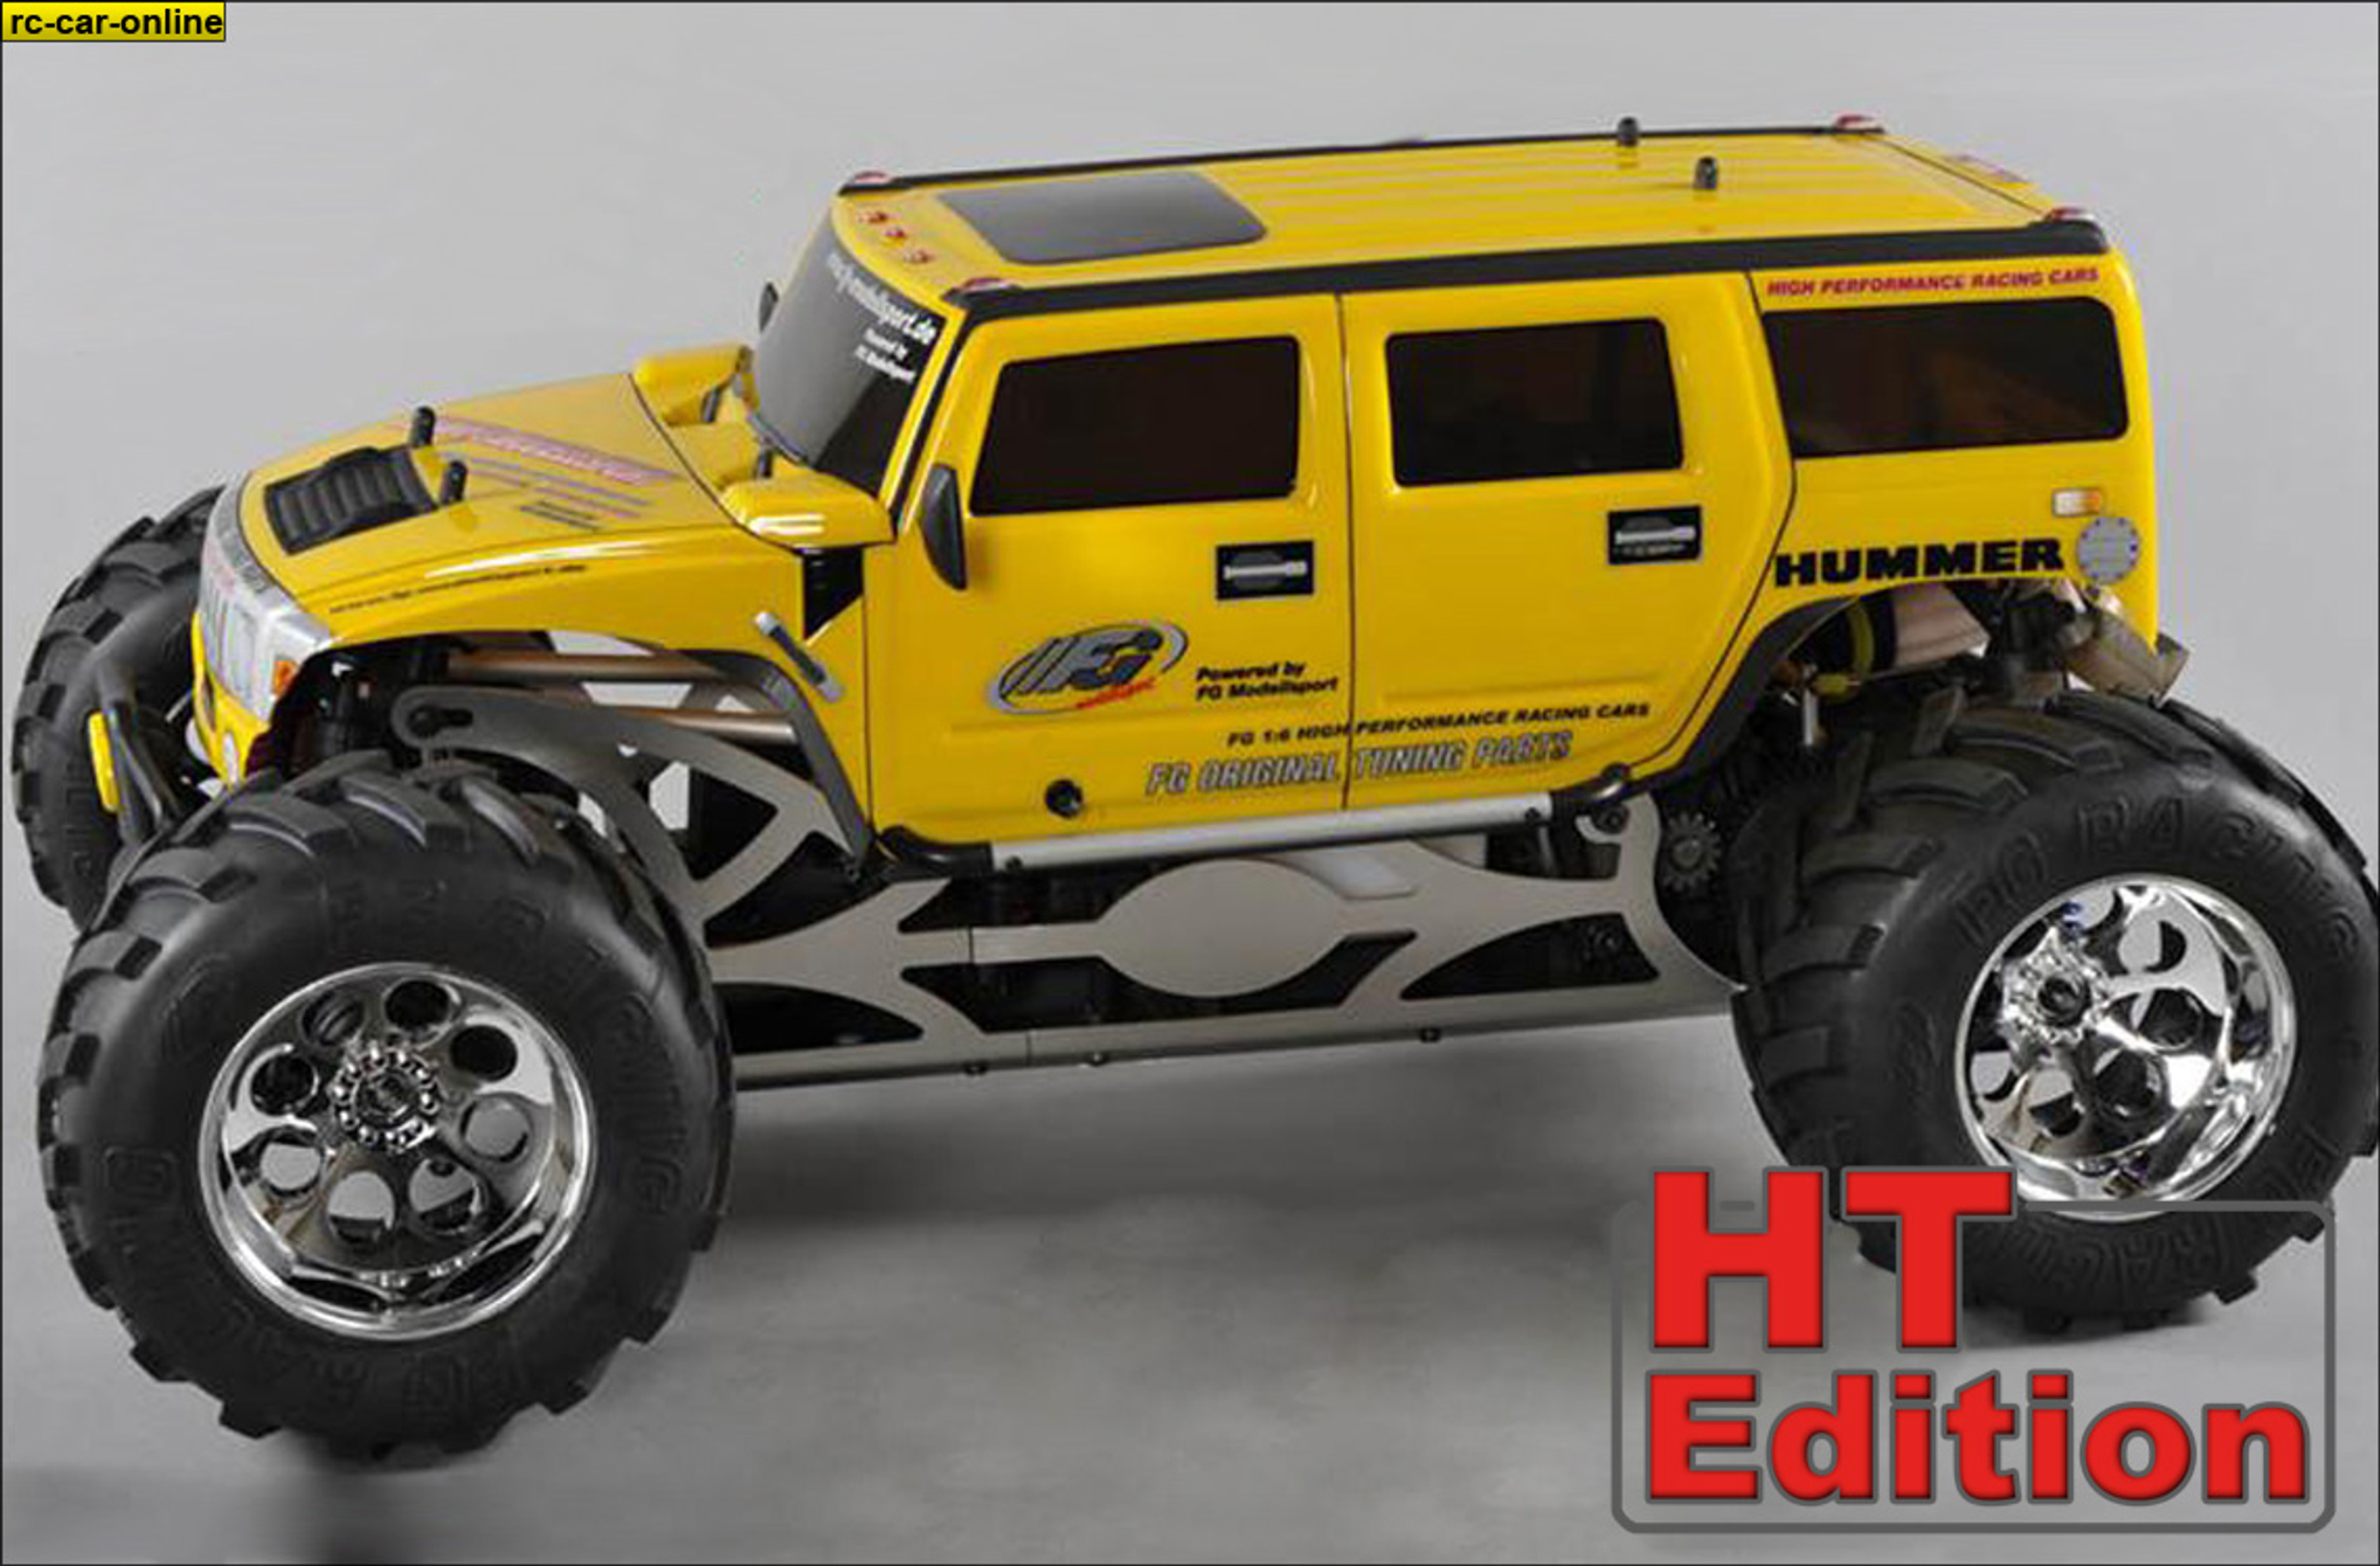 FG Monster Hummer WB535 2WD HT-Edition